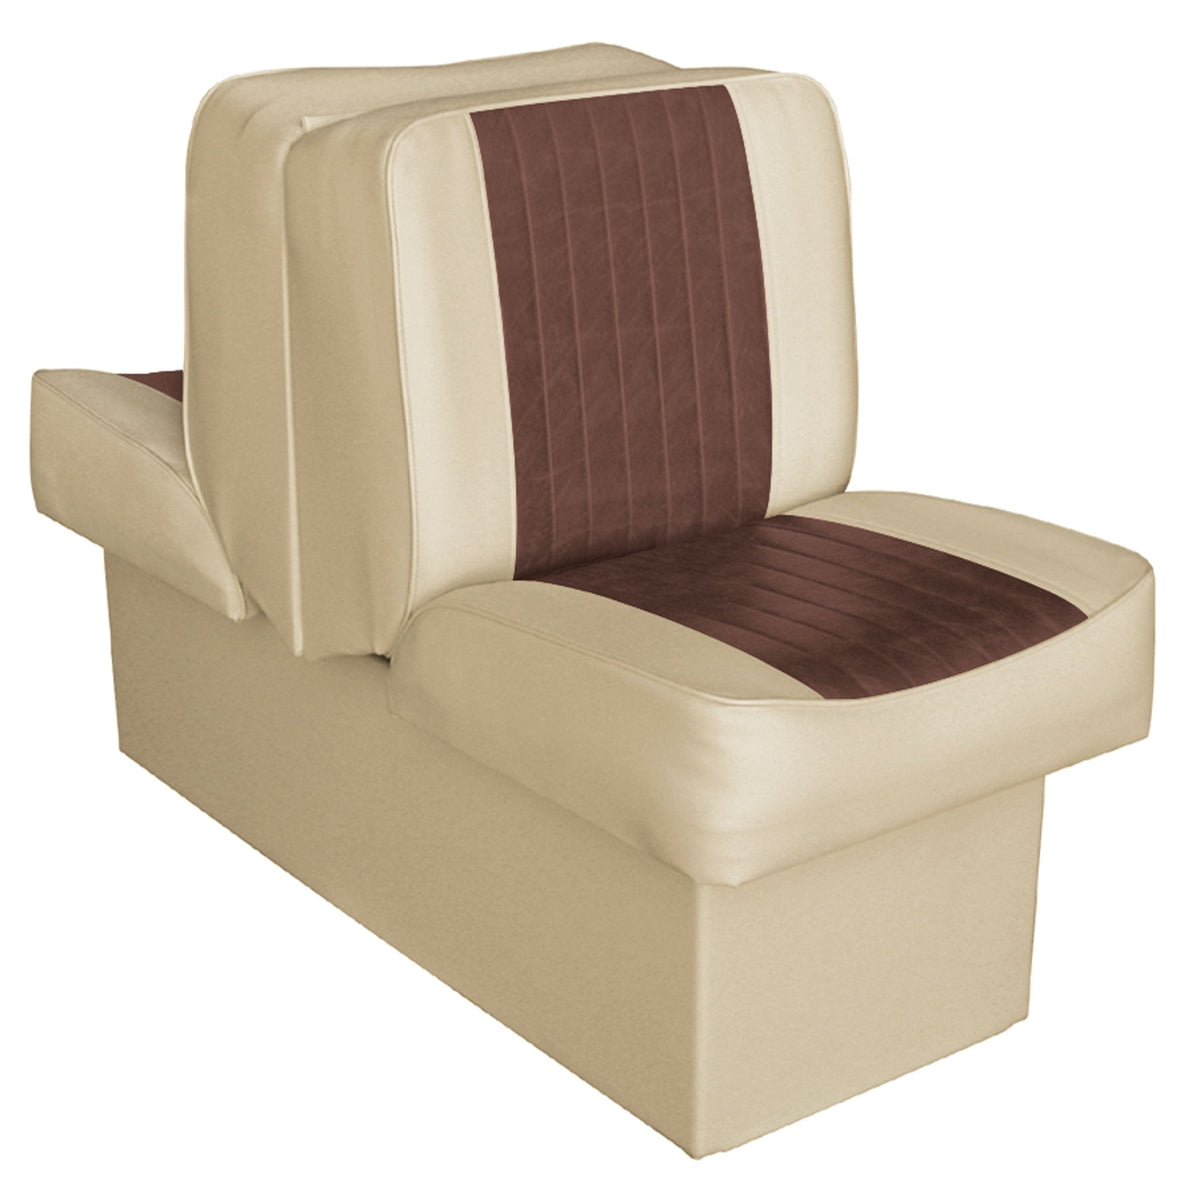 Wise Not Qualified for Free Shipping Wise Lounge Seat Deluxe Runner Sand-Brown #8WD707P-1-662